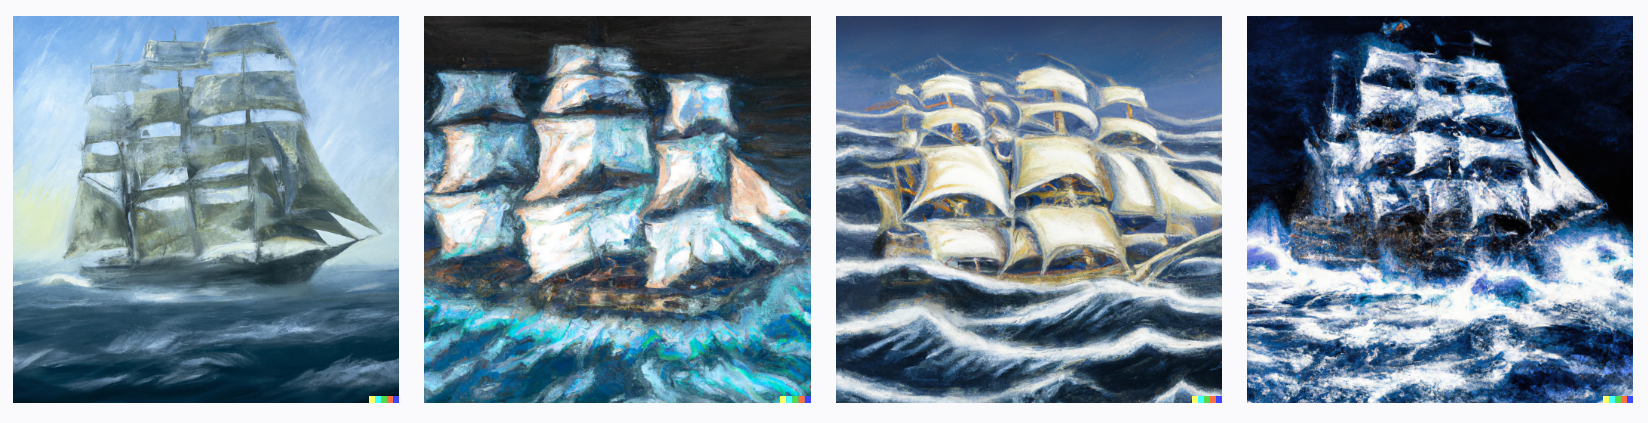 A sail 3 decks 50  vessel on the ocean waves like Aivazovsky painting style